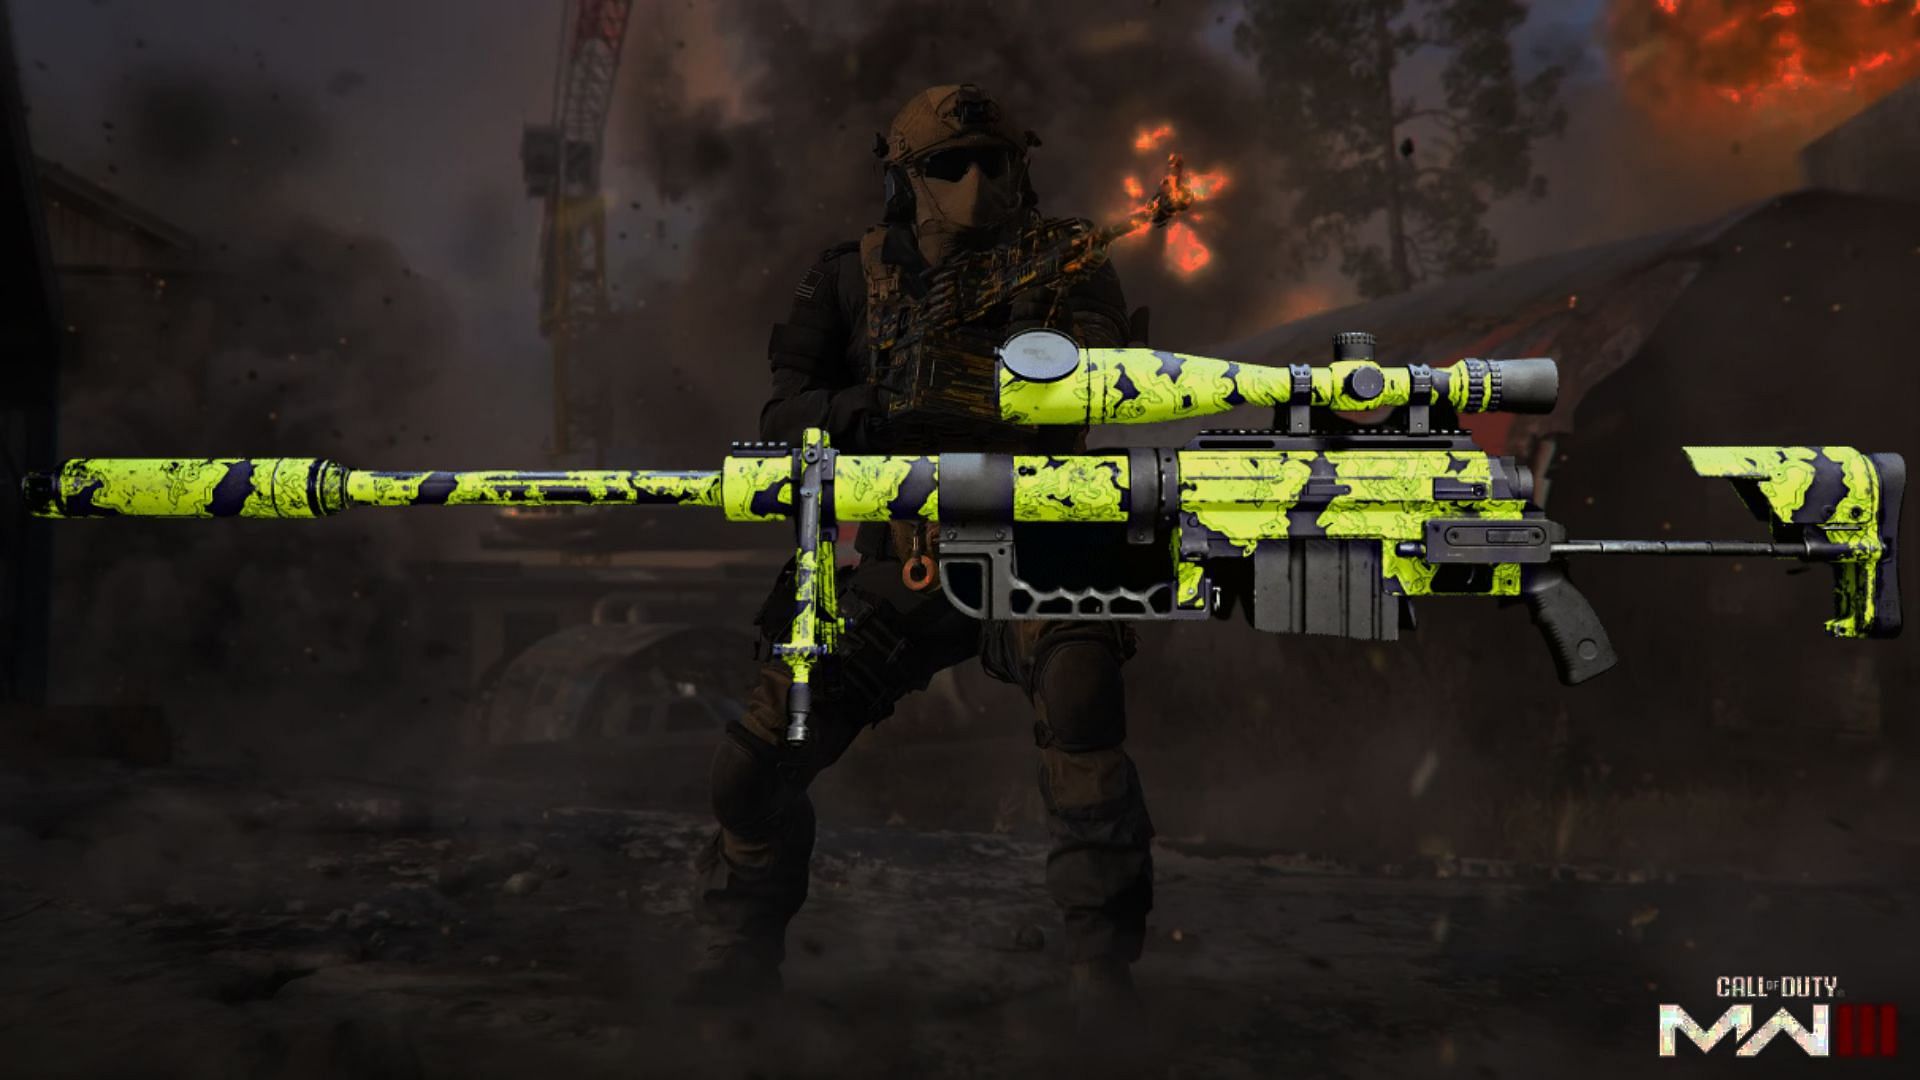 FJX Imperium ranks among the 5 best snipers in Warzone (Image via Activision)